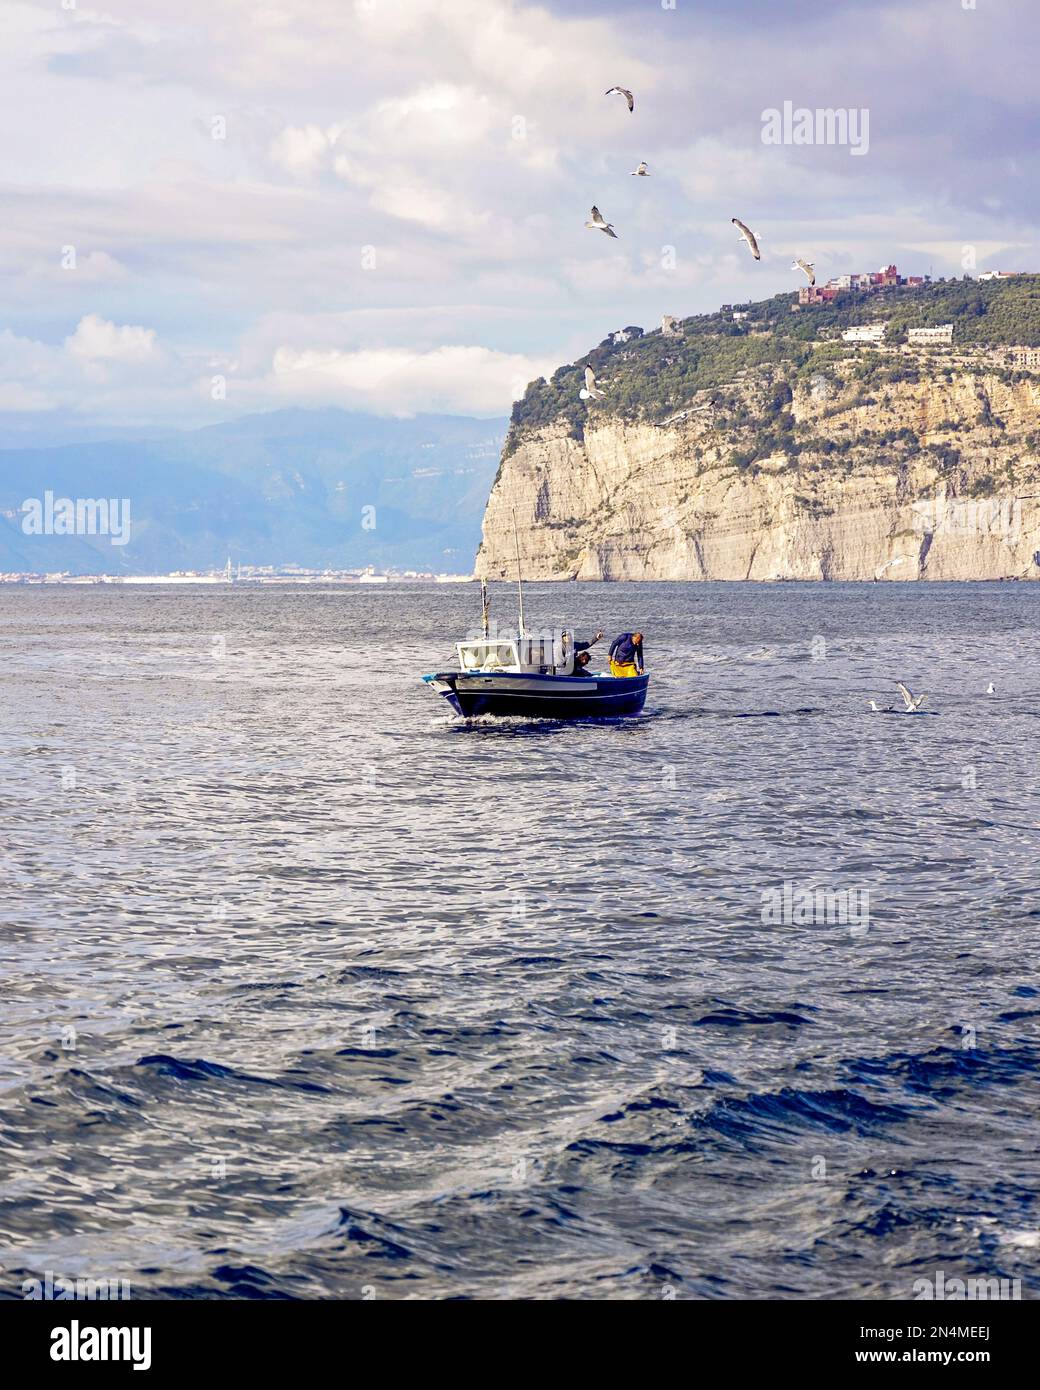 Sorrento, Italy - Fisherman on his boat getting fresh seafood in Naples Bay. Food is then cooked and served in a local restaurant in Sorrento, Marina . Stock Photo